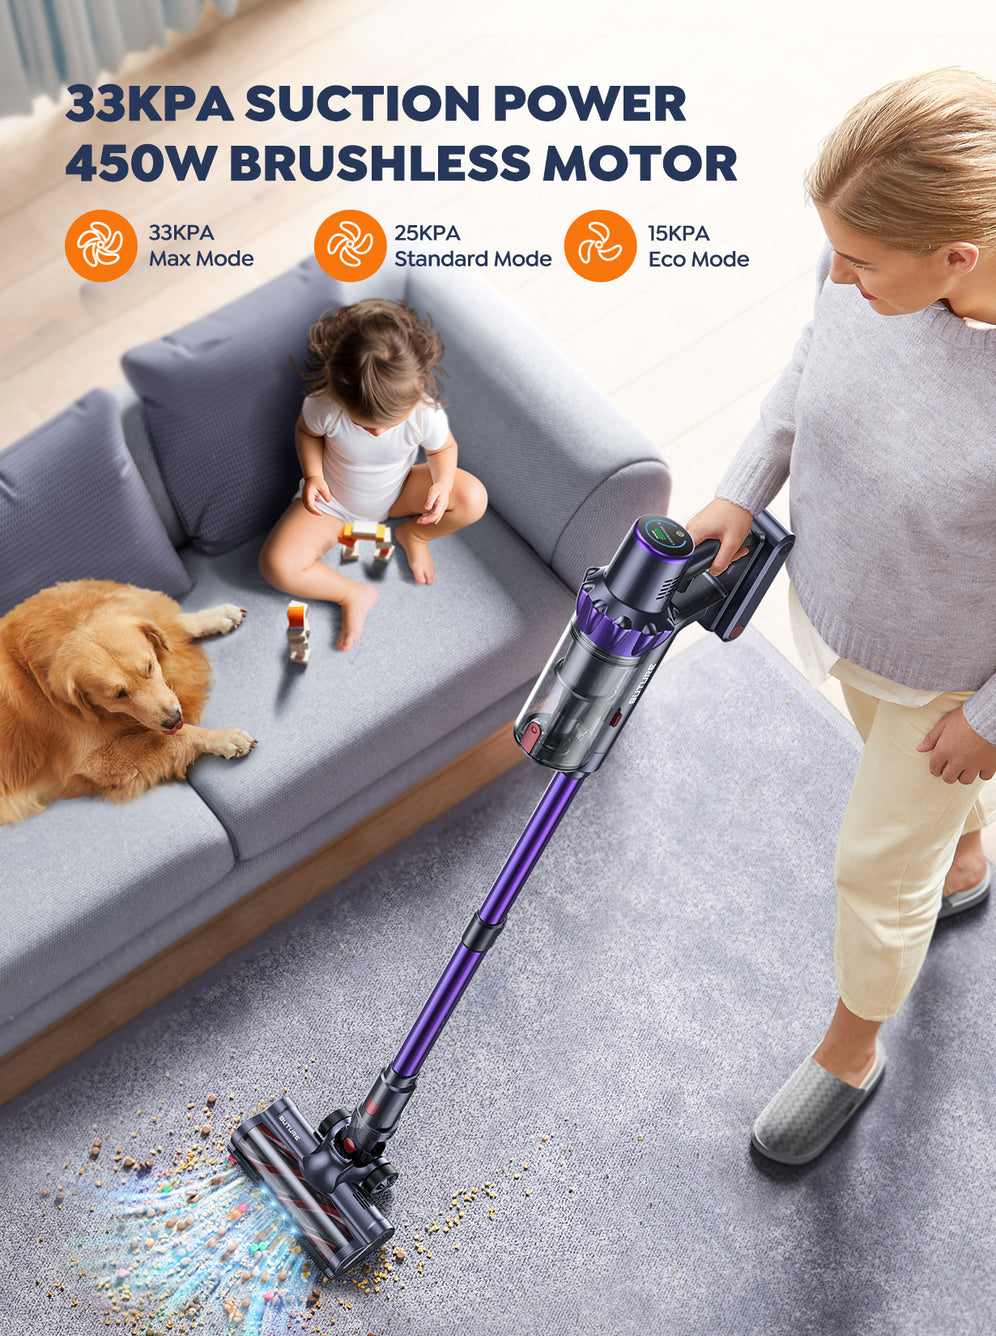  BuTure Cordless Vacuum Cleaner, 450W 38KPA Stick